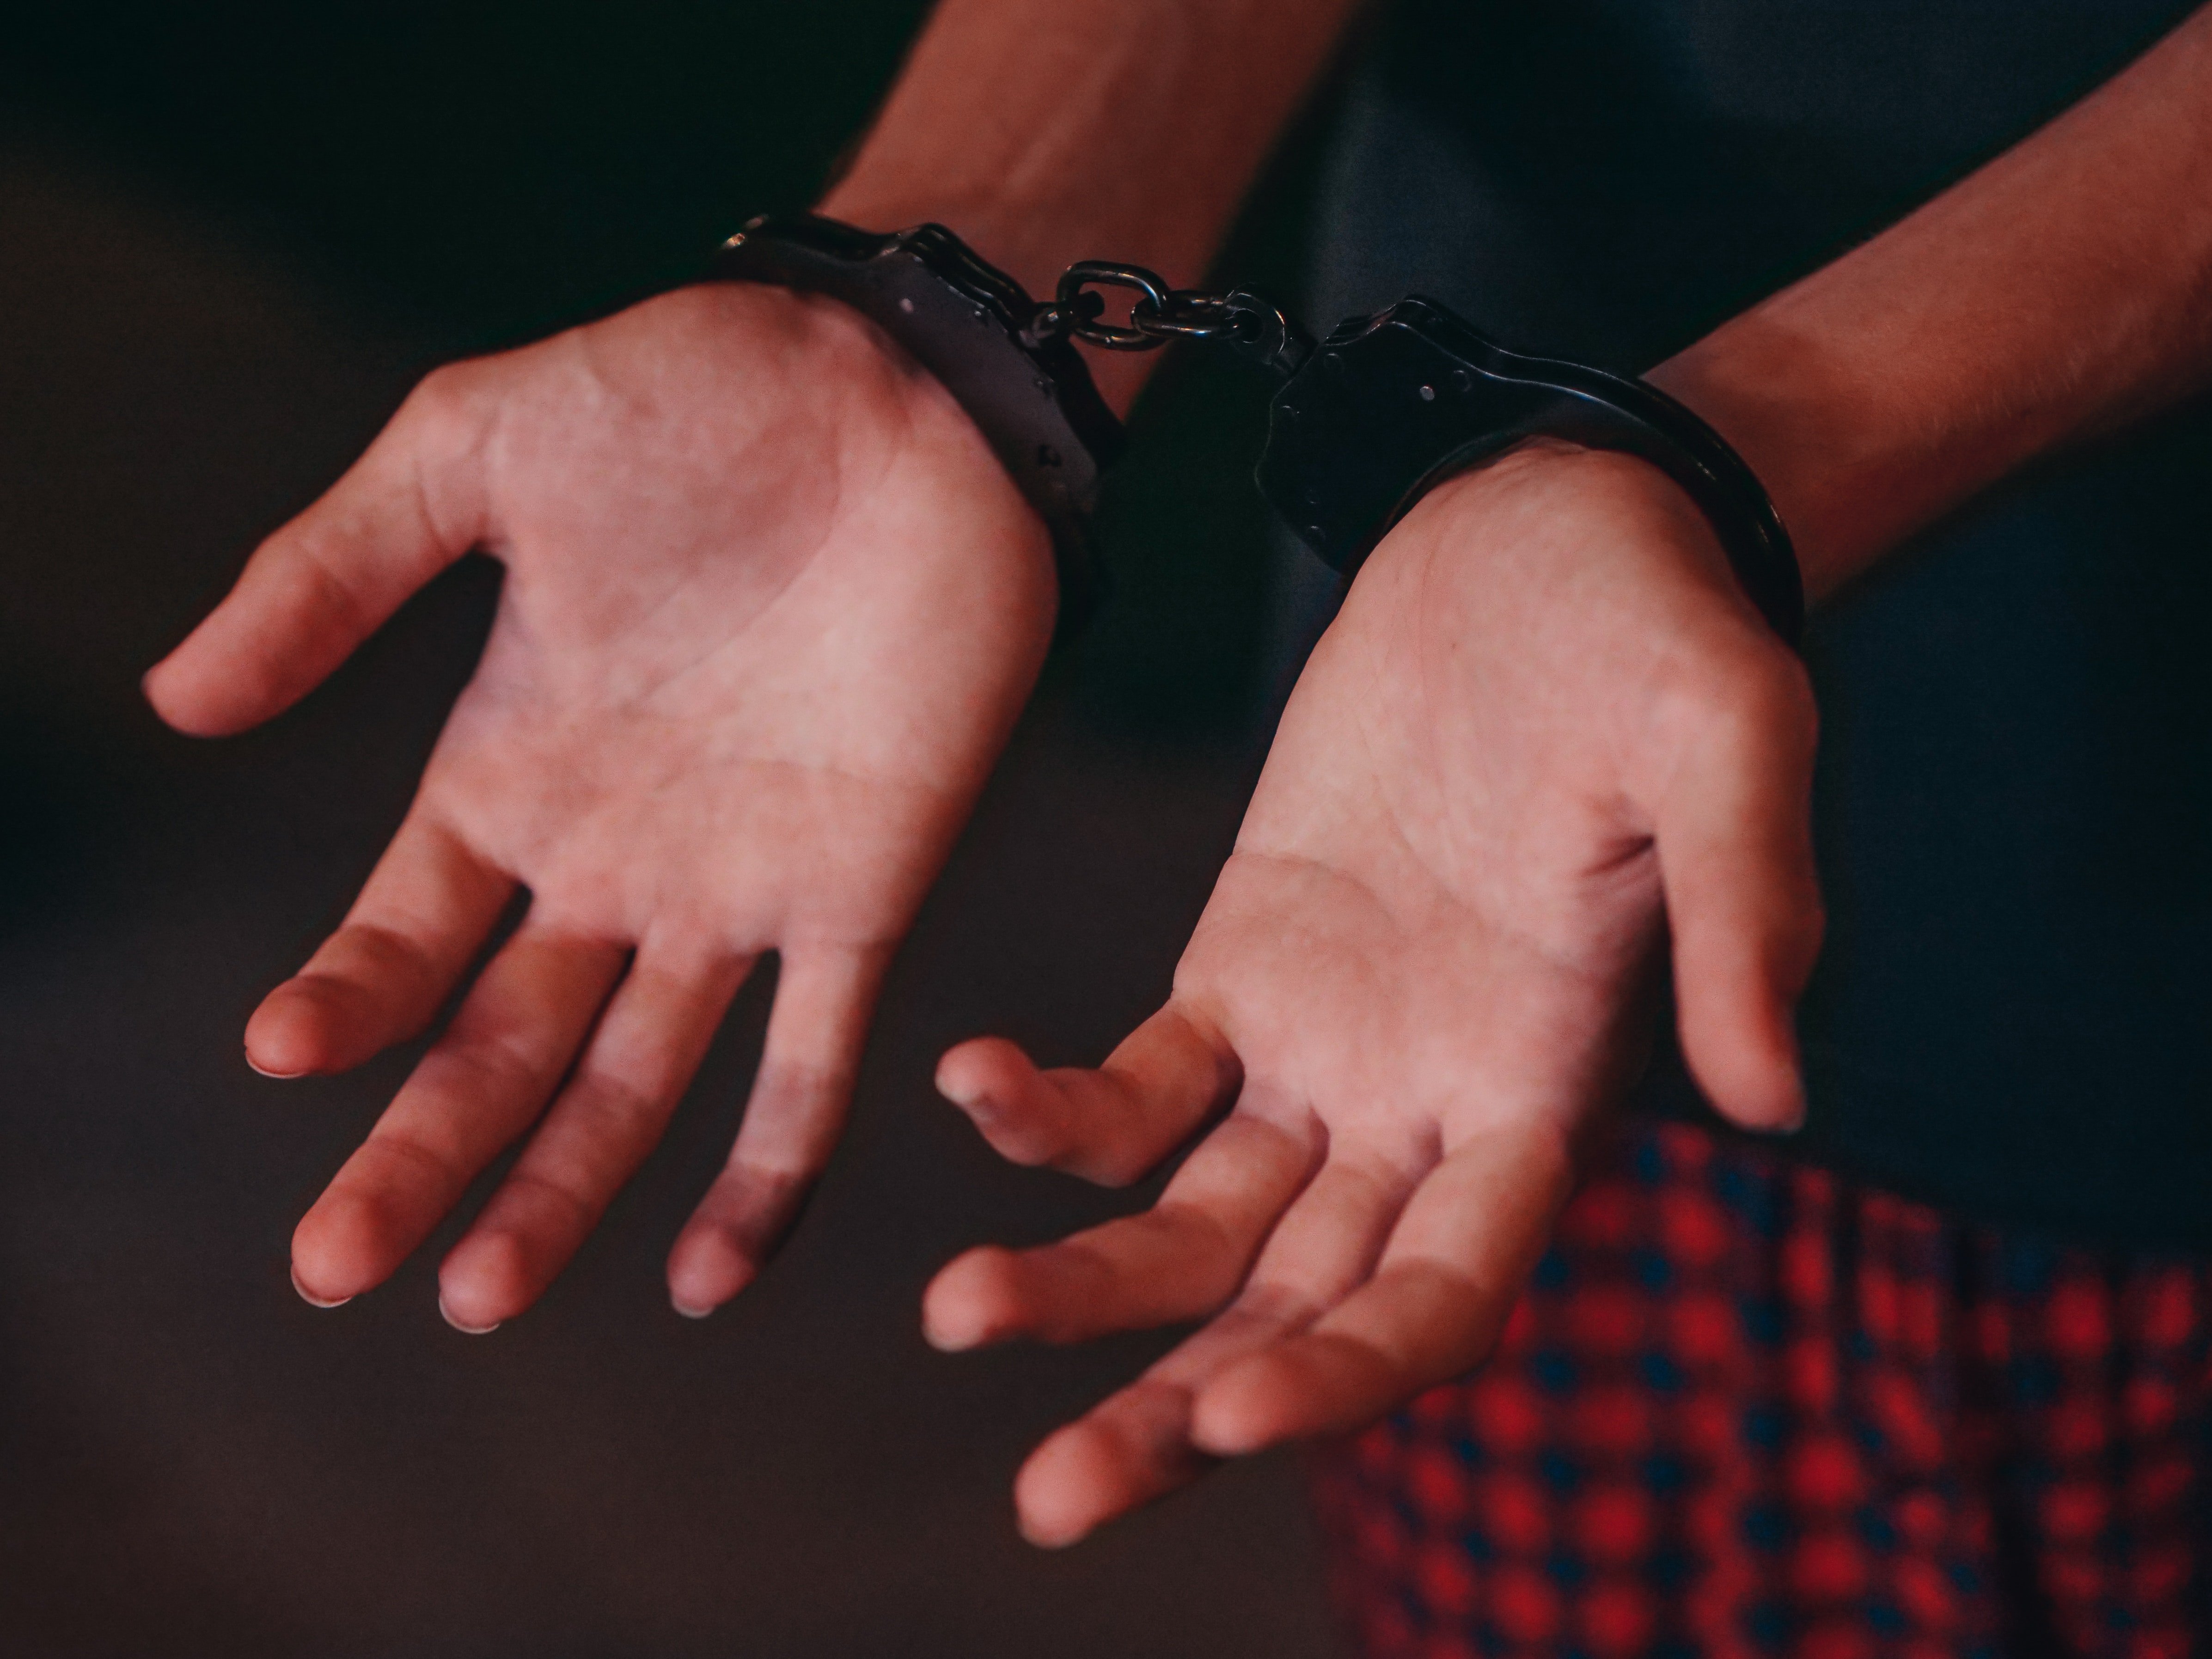 The man was arrested in his home country. | Source: Pexels